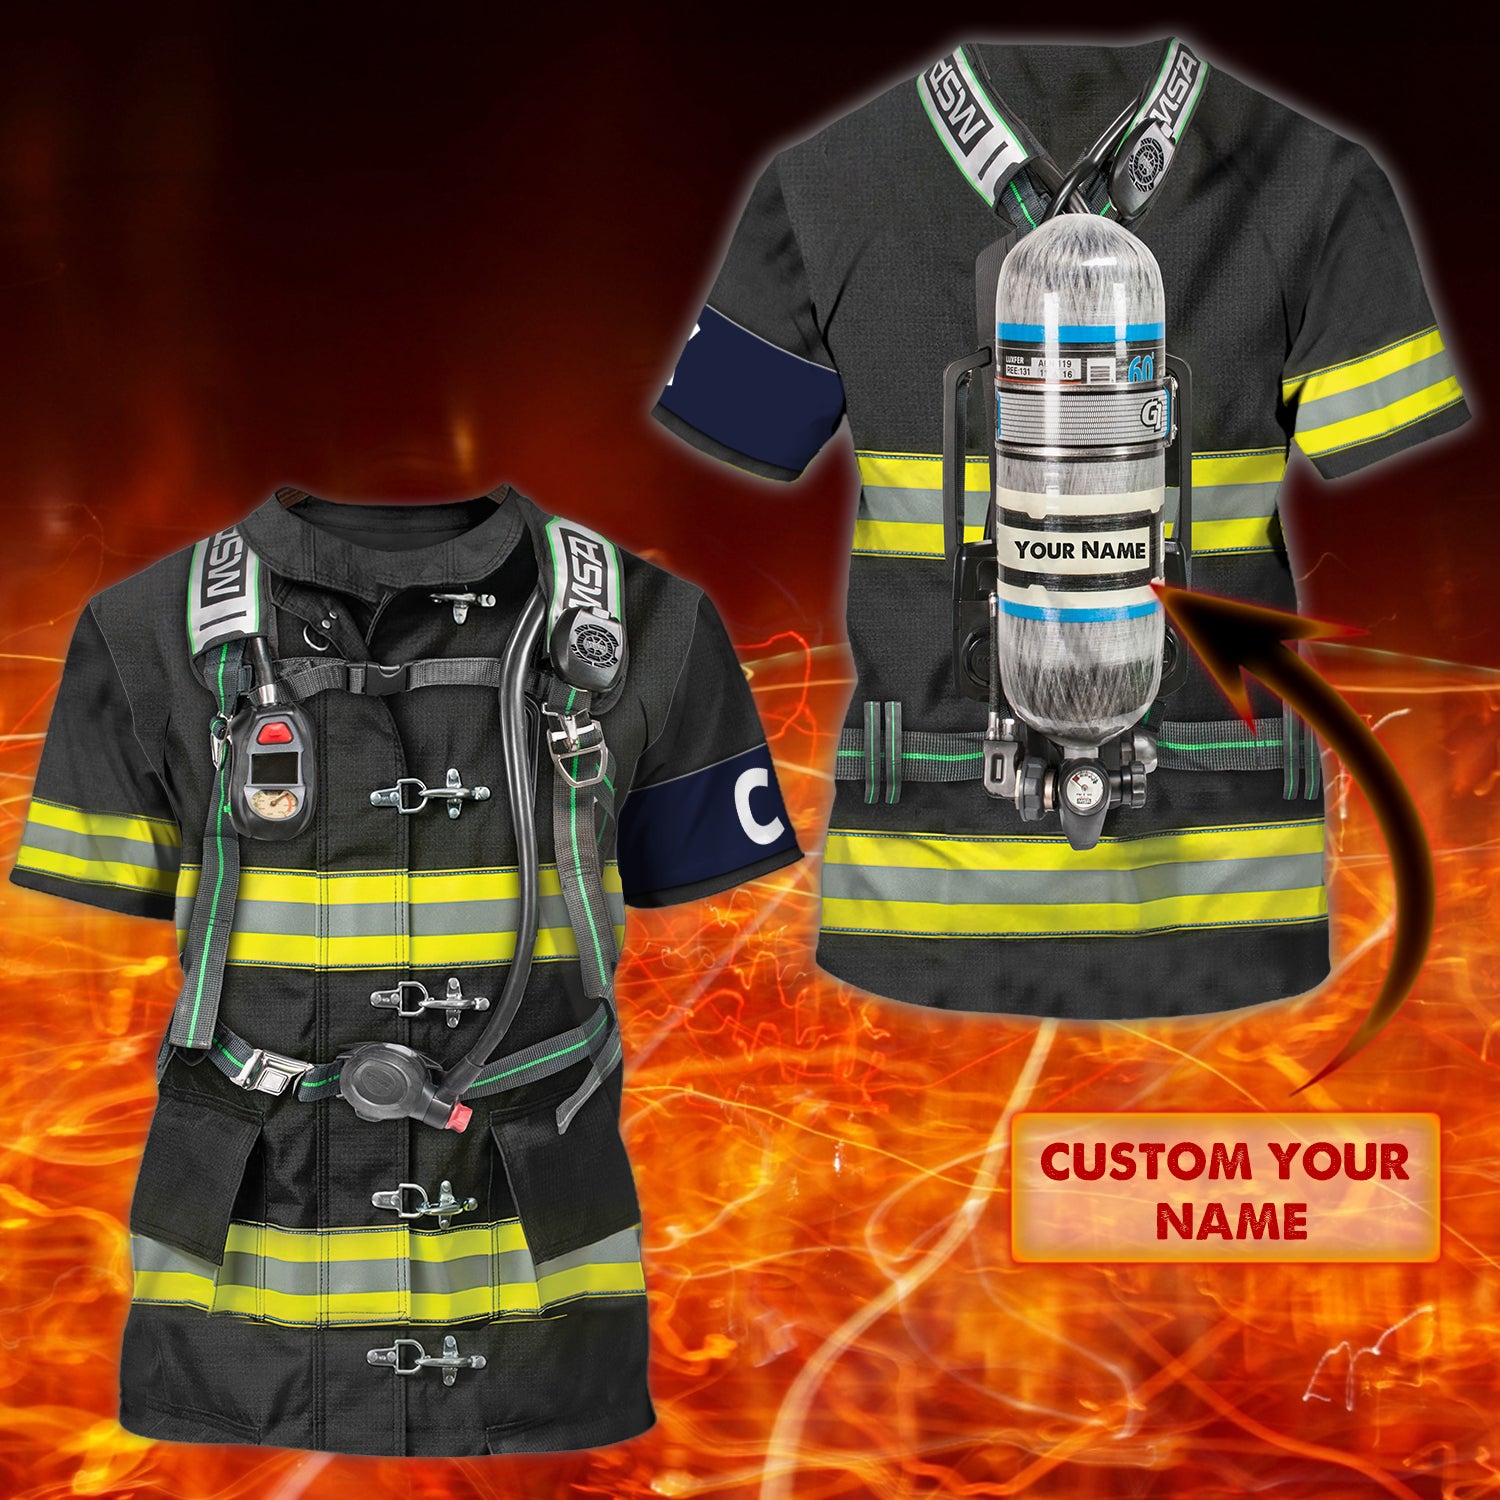 Firefighter - Personalized Name 3D Tshirt 02 - CV98